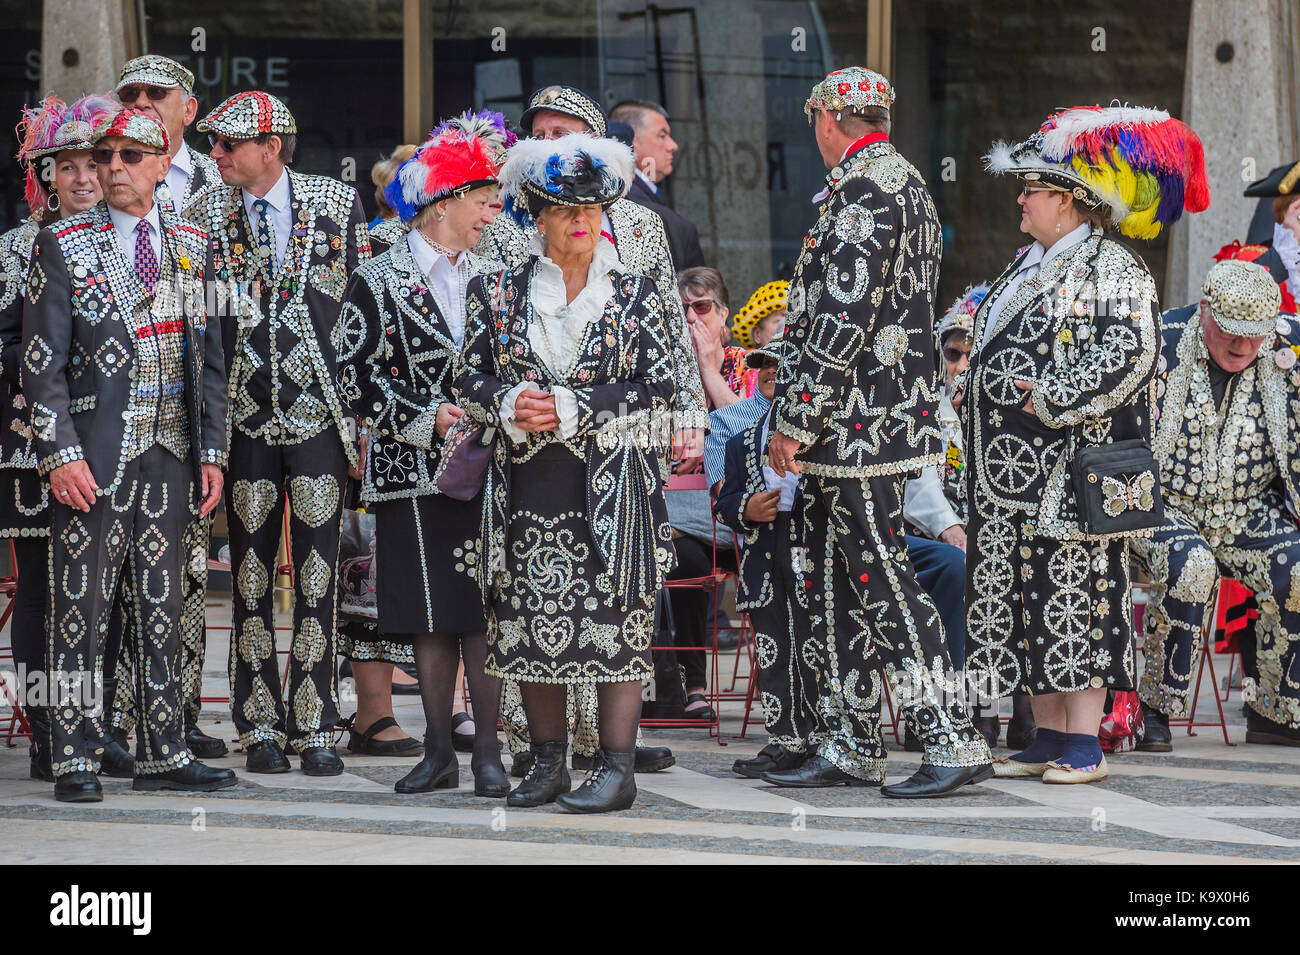 London, UK. 24th September, 2017. The annual Harvest Festival organised by the Pearly Society starts with a ceremony in Guild hall courtyard and then processes to Bow Church in the City of London. Pearly Kings and Queens of London get together for the biggest event in the Pearly calendar. London 24 Sep 2017. Credit: Guy Bell/Alamy Live News Stock Photo